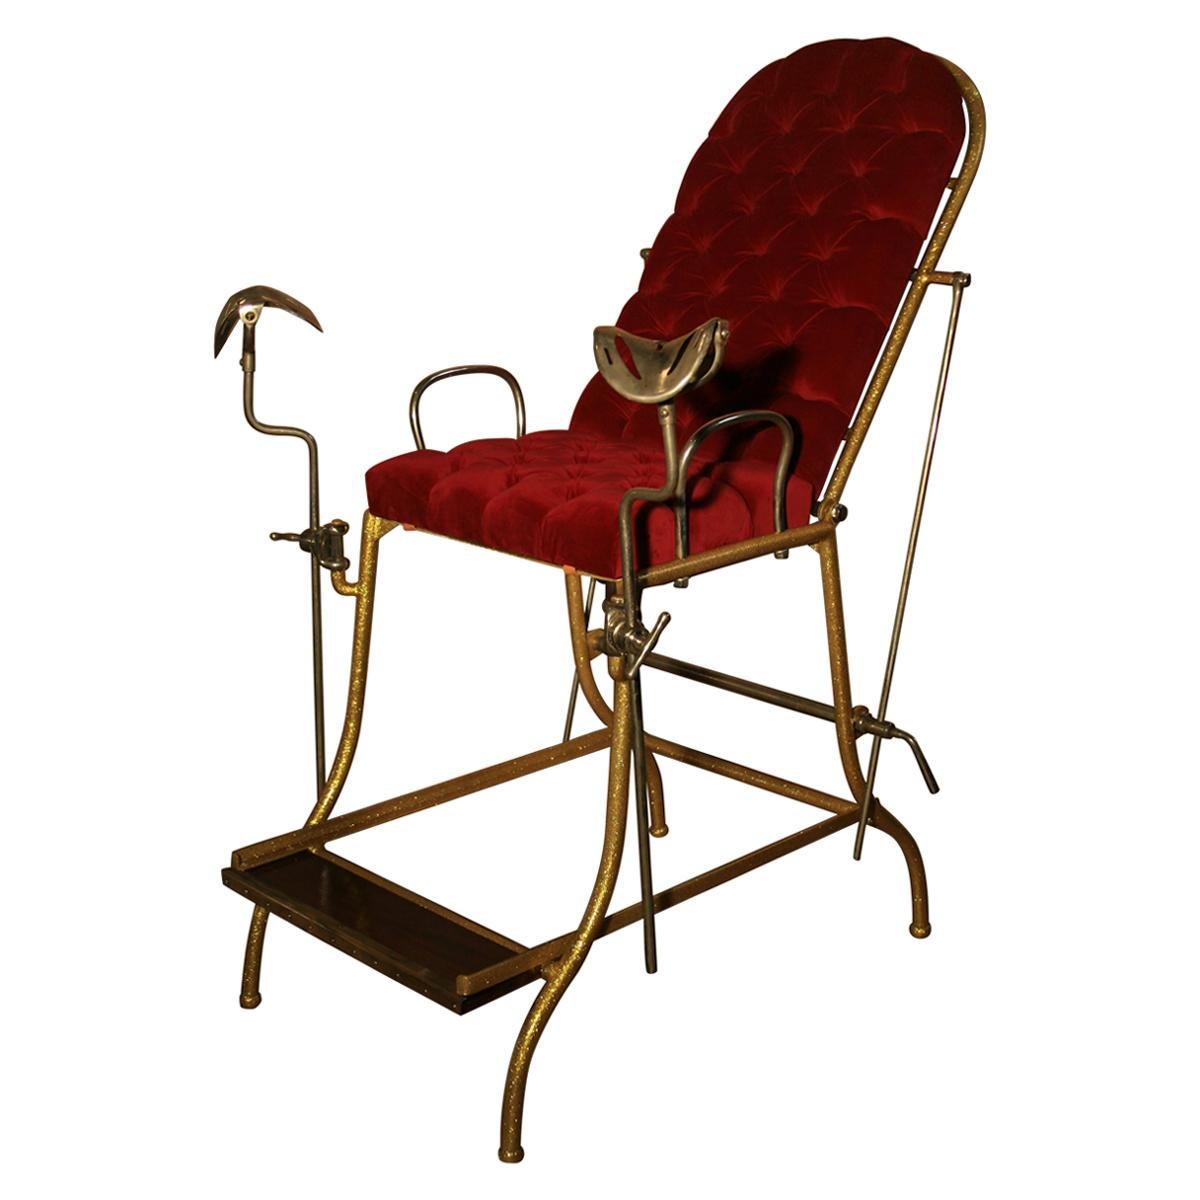 1930s Vintage Gynecological Chair For Sale